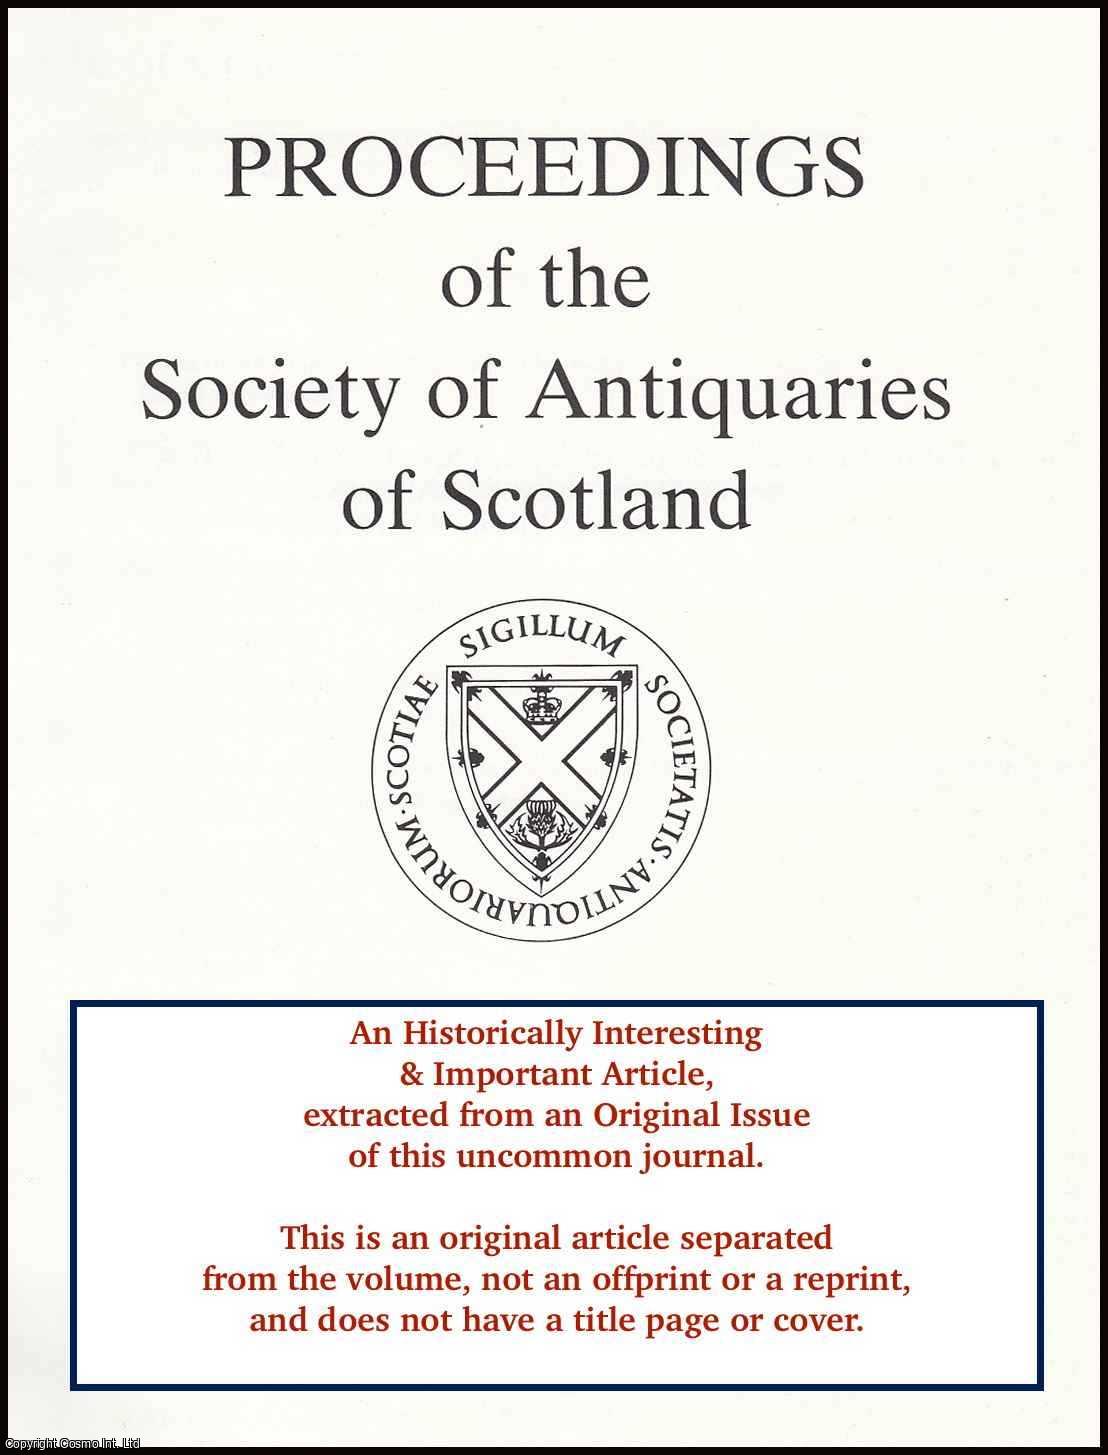 Dennis Turner - The Bishops of Argyll and The Castle of Achanduin, Lismore, AD 1180-1343. An original article from the Proceedings of the Society of Antiquaries of Scotland, 1998.